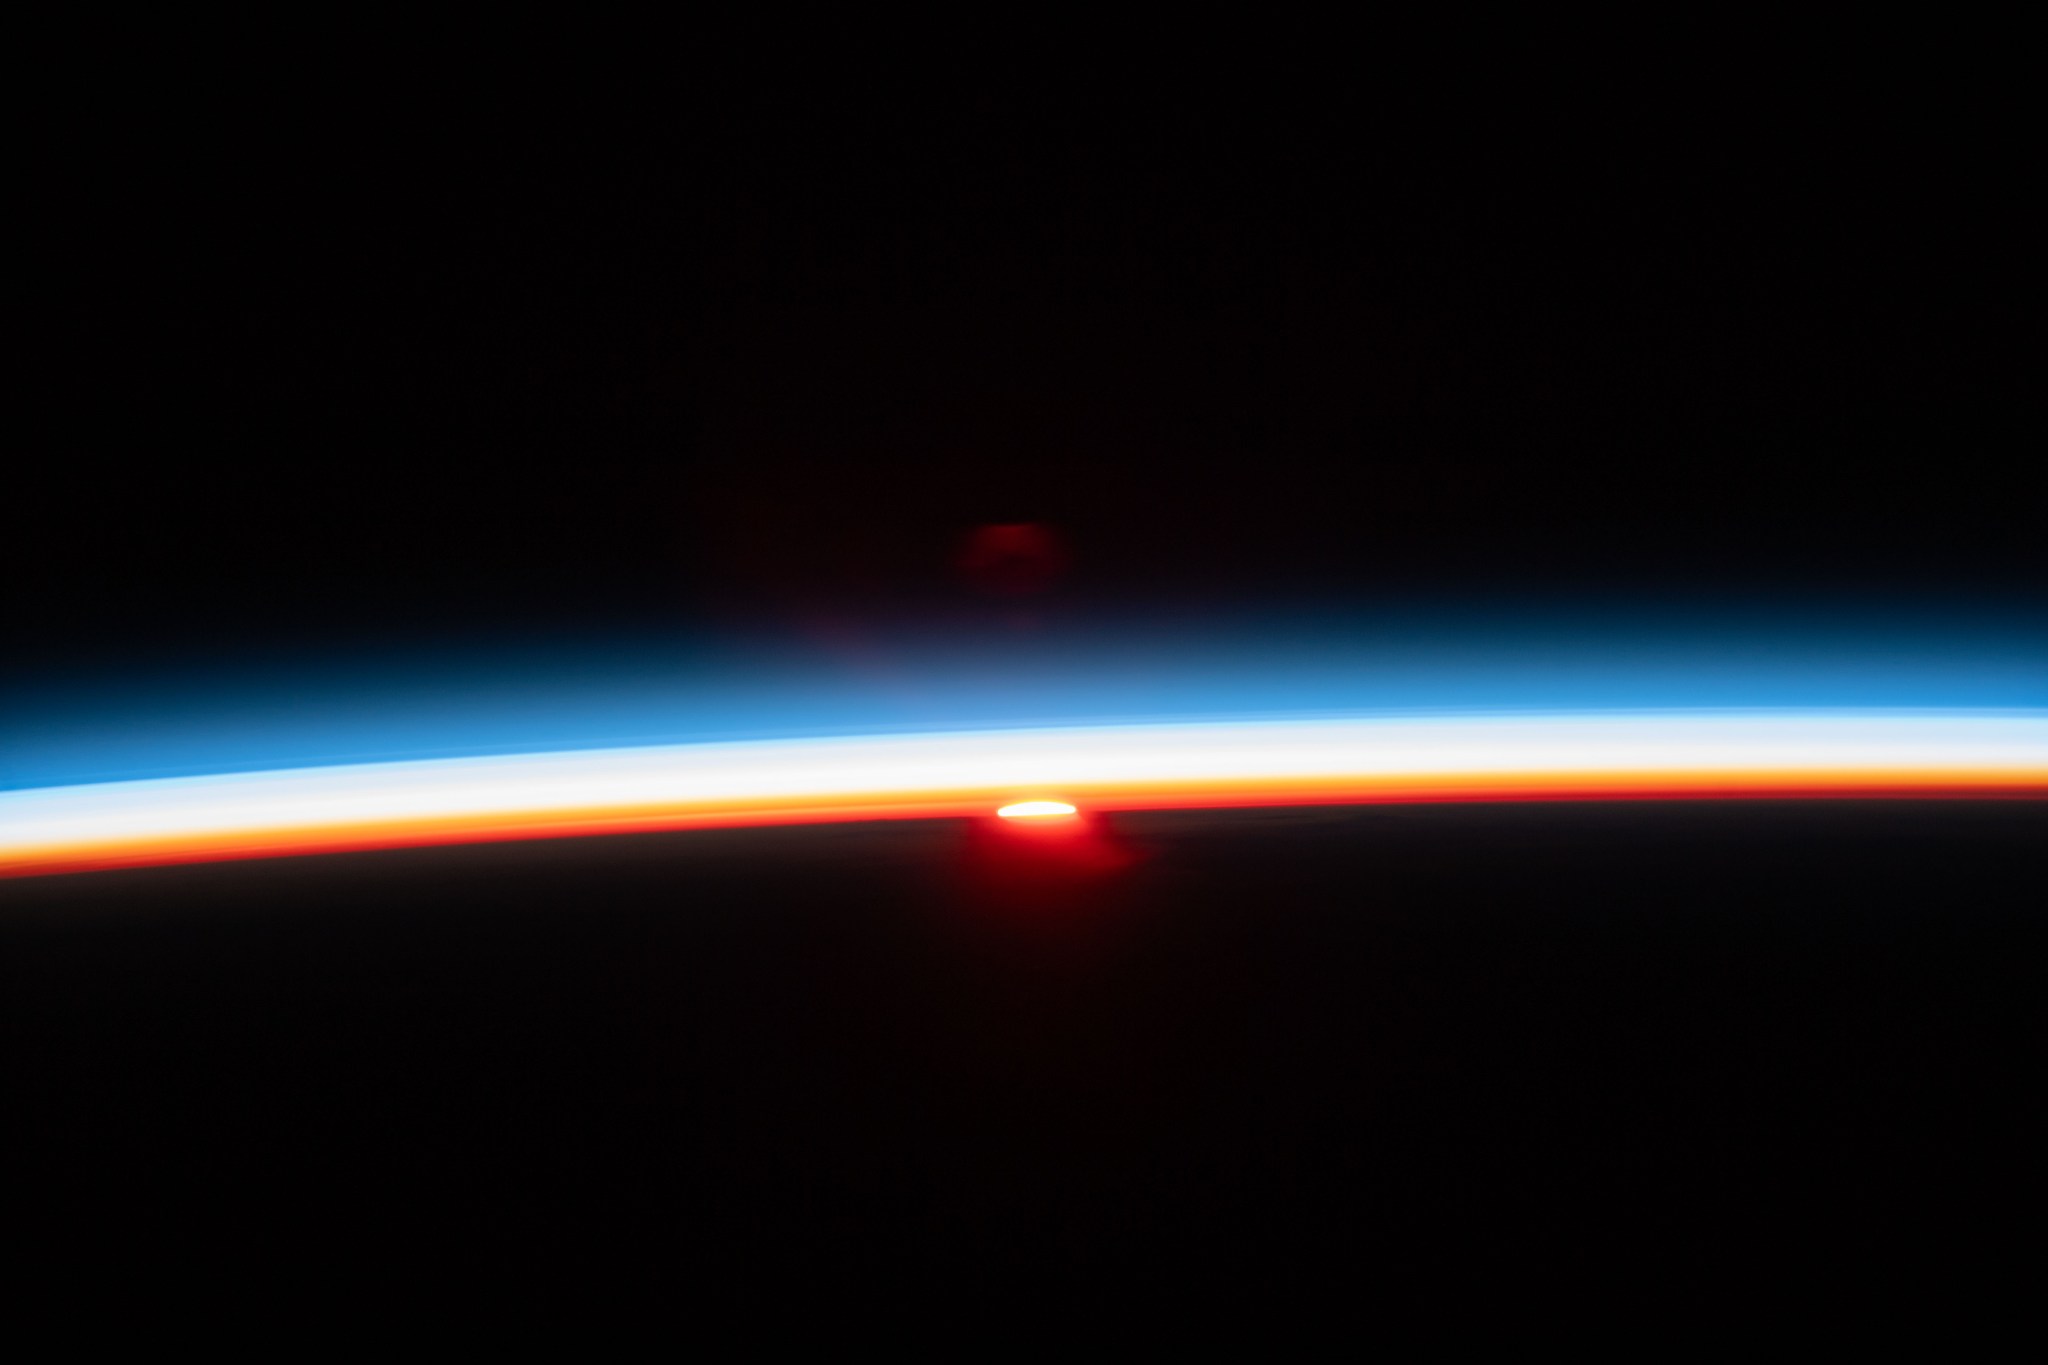 The sun's last rays illuminate Earth's atmosphere in this photograph of an orbital sunset from the International Space Station as it soared 261 miles above the Pacific Ocean off the northern coast of Japan.